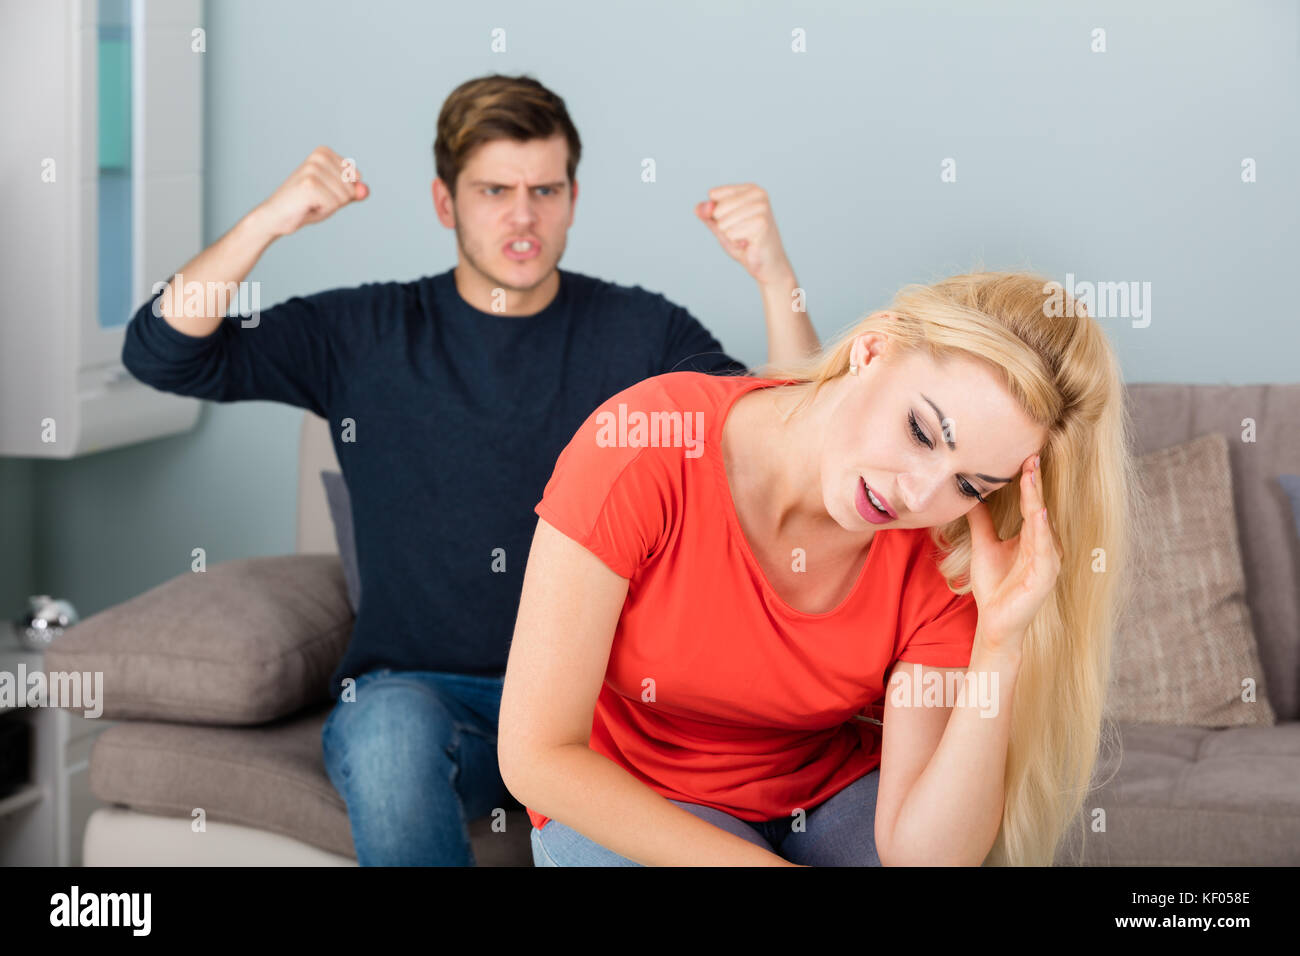 Angry Young Man Shouting To His Wife About Divorce And Infidelity In Living Room Stock Photo